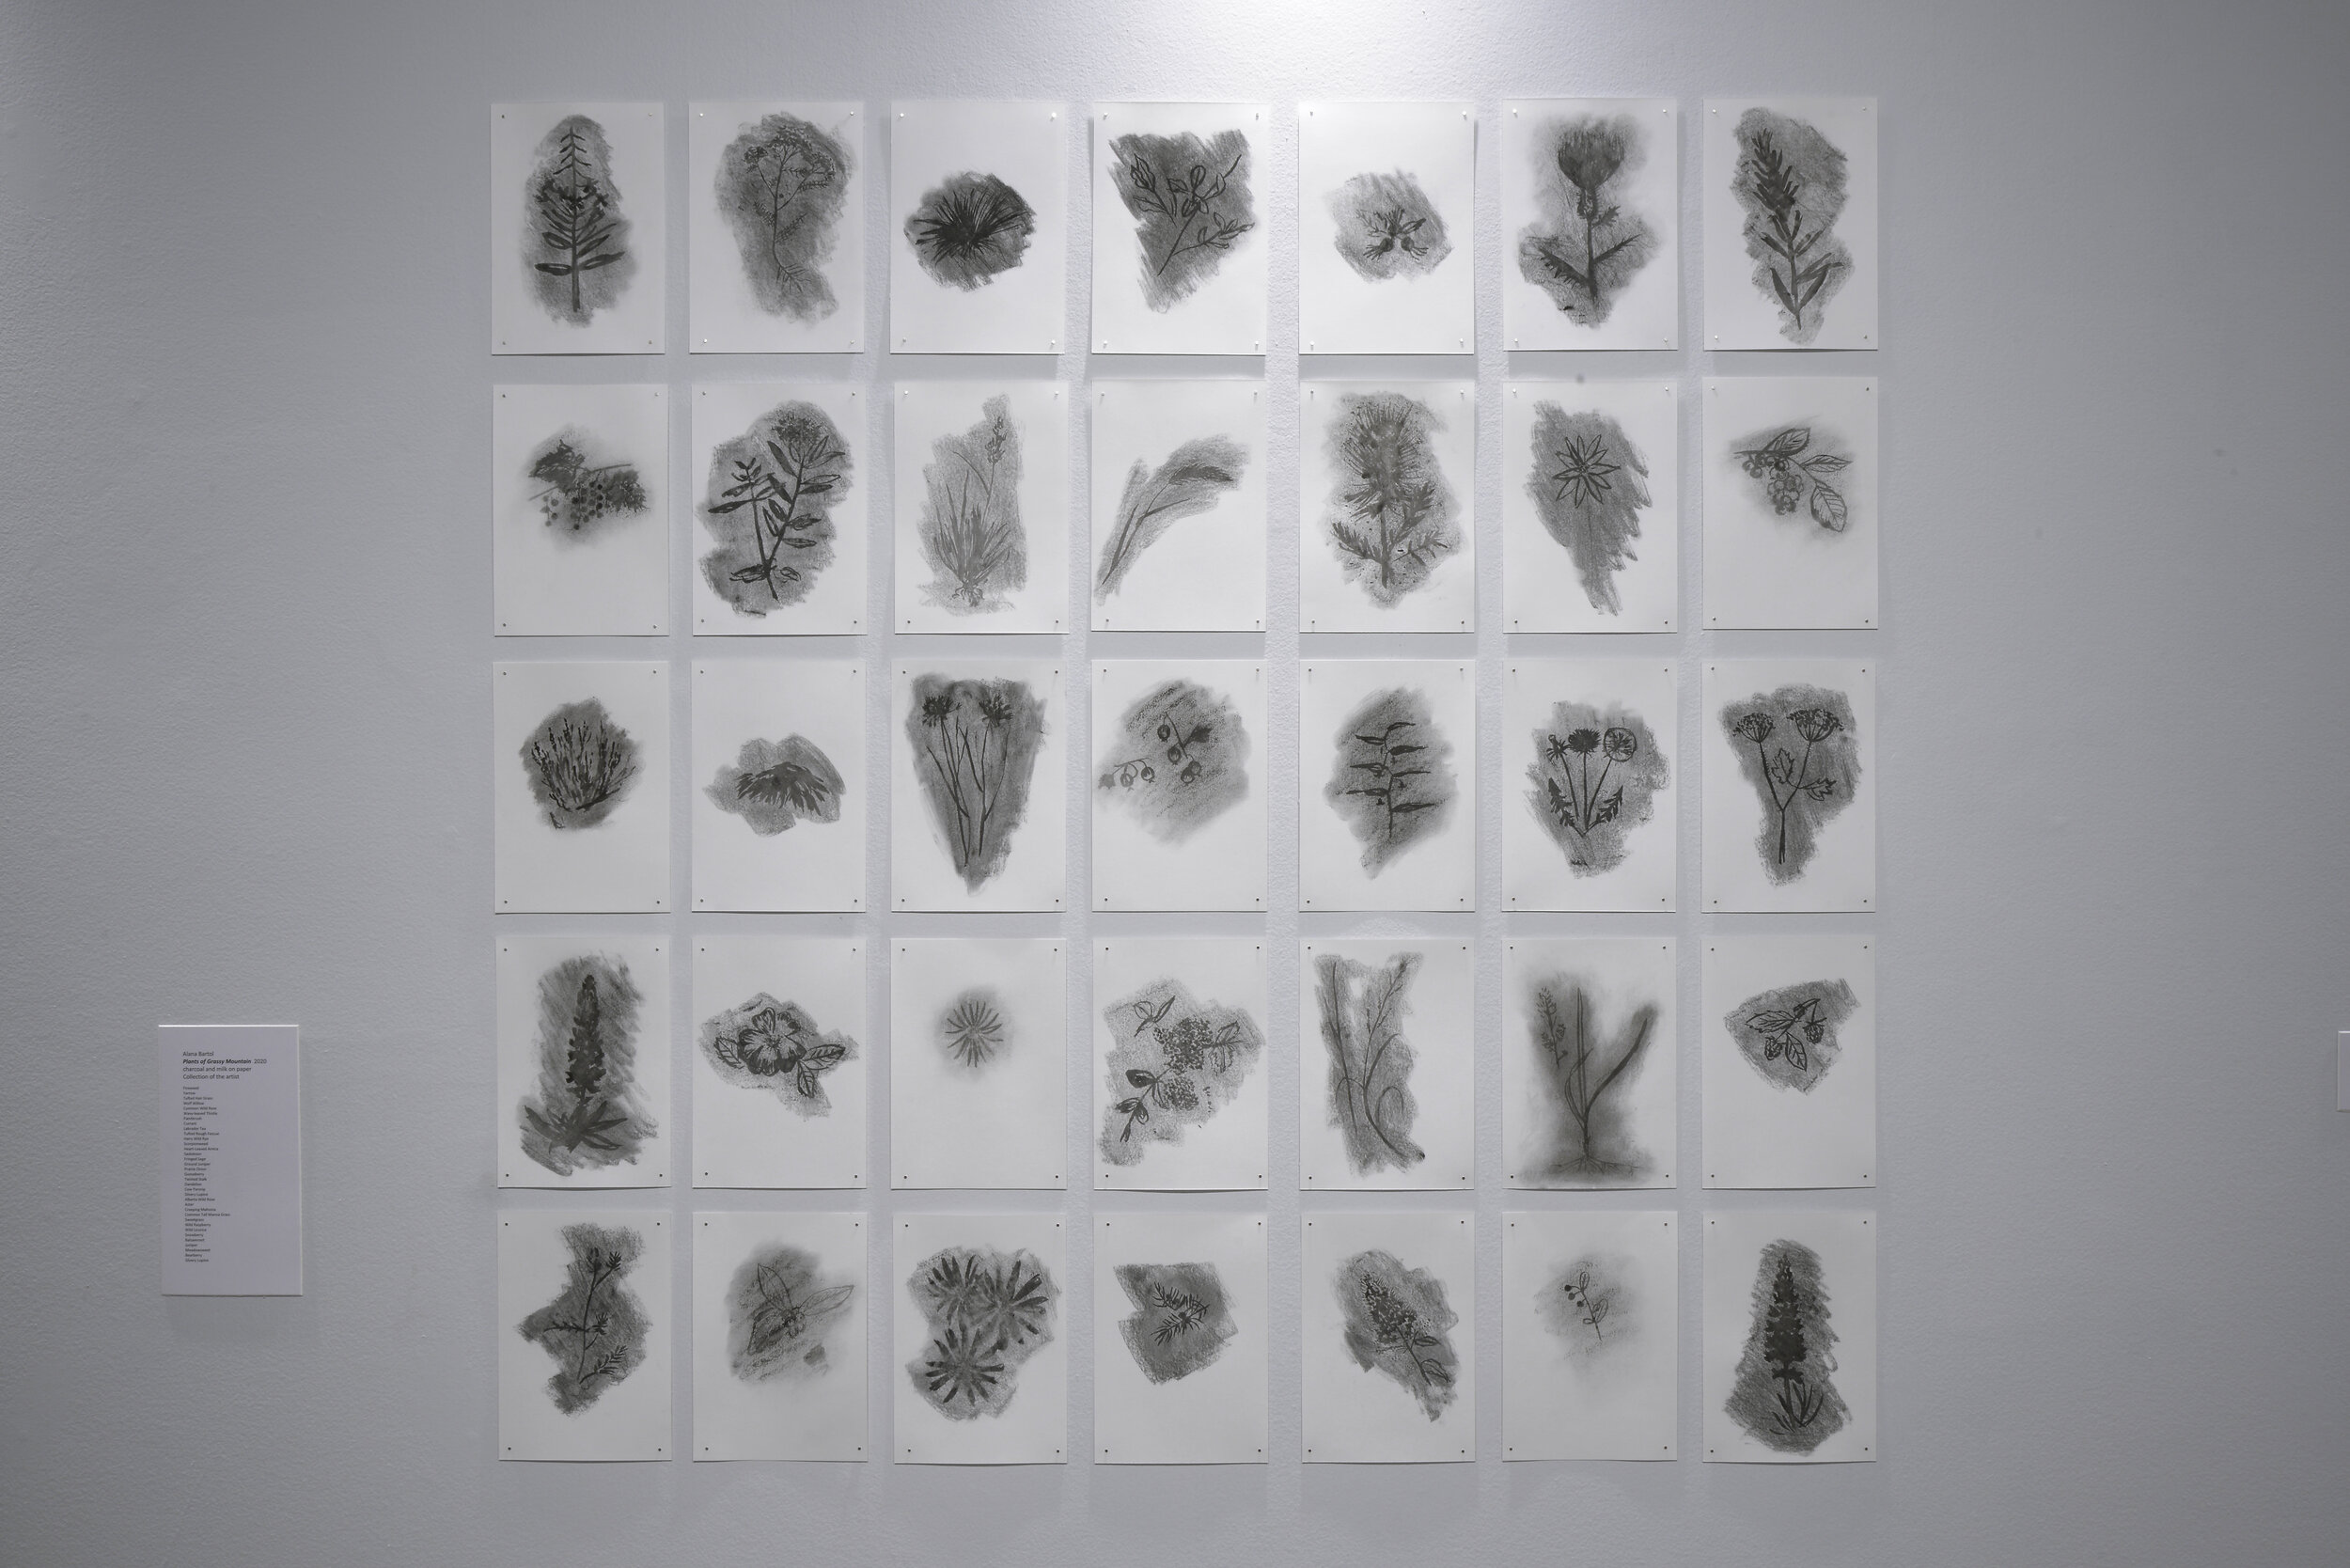  Alana Bartol,  Plants of Grassy Mountain , 2020, original drawings, charcoal and milk on paper. 